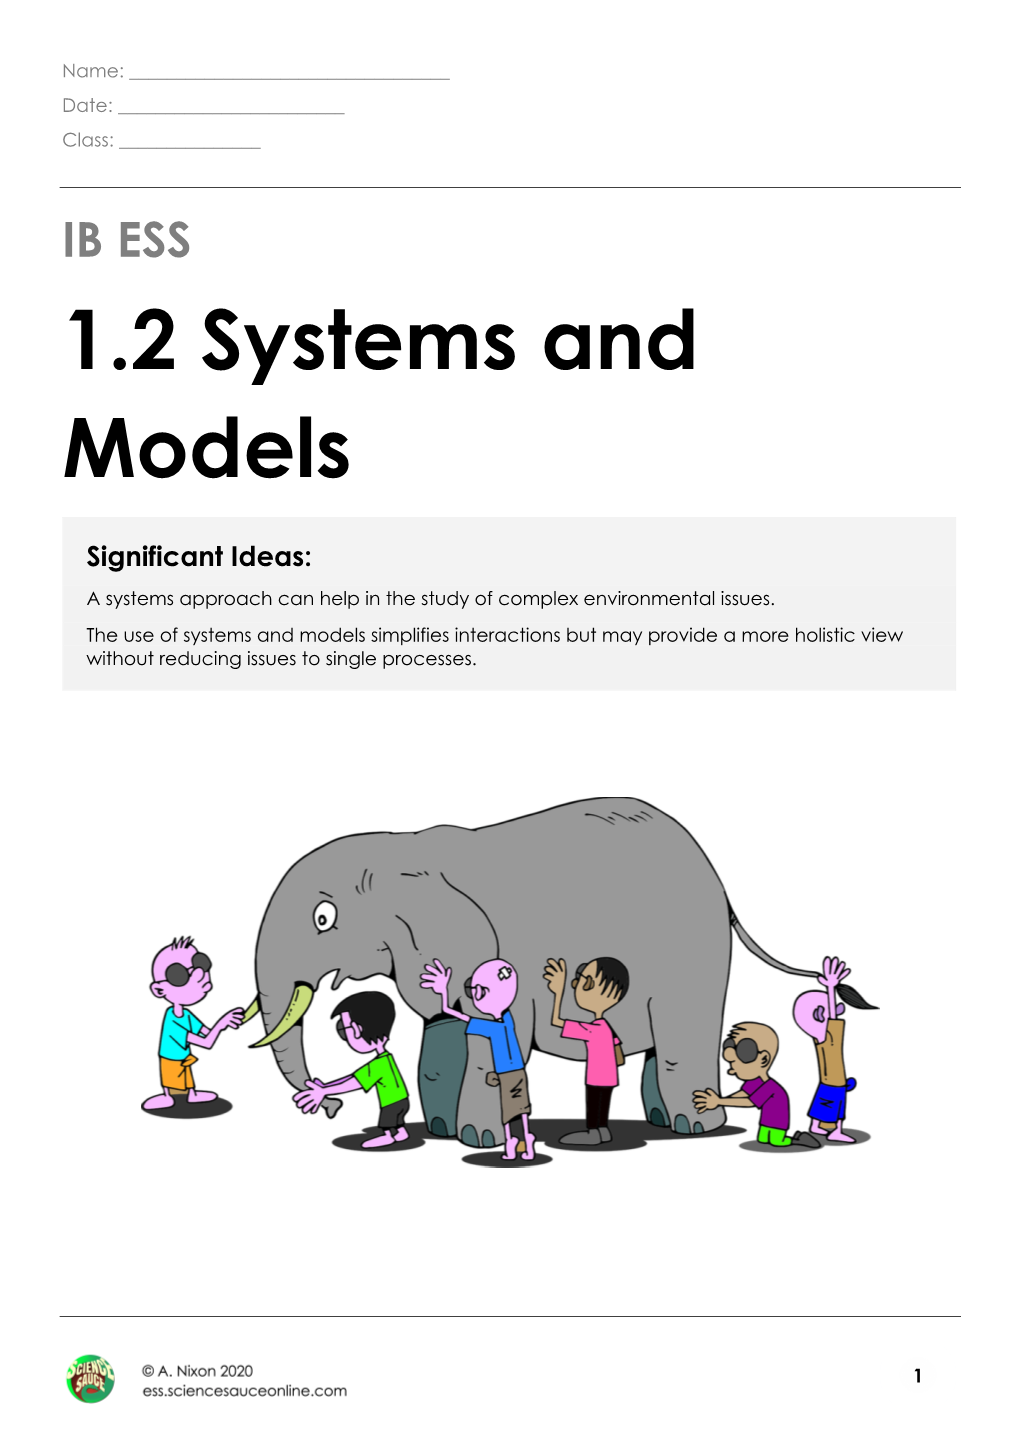 1.2 Systems and Models